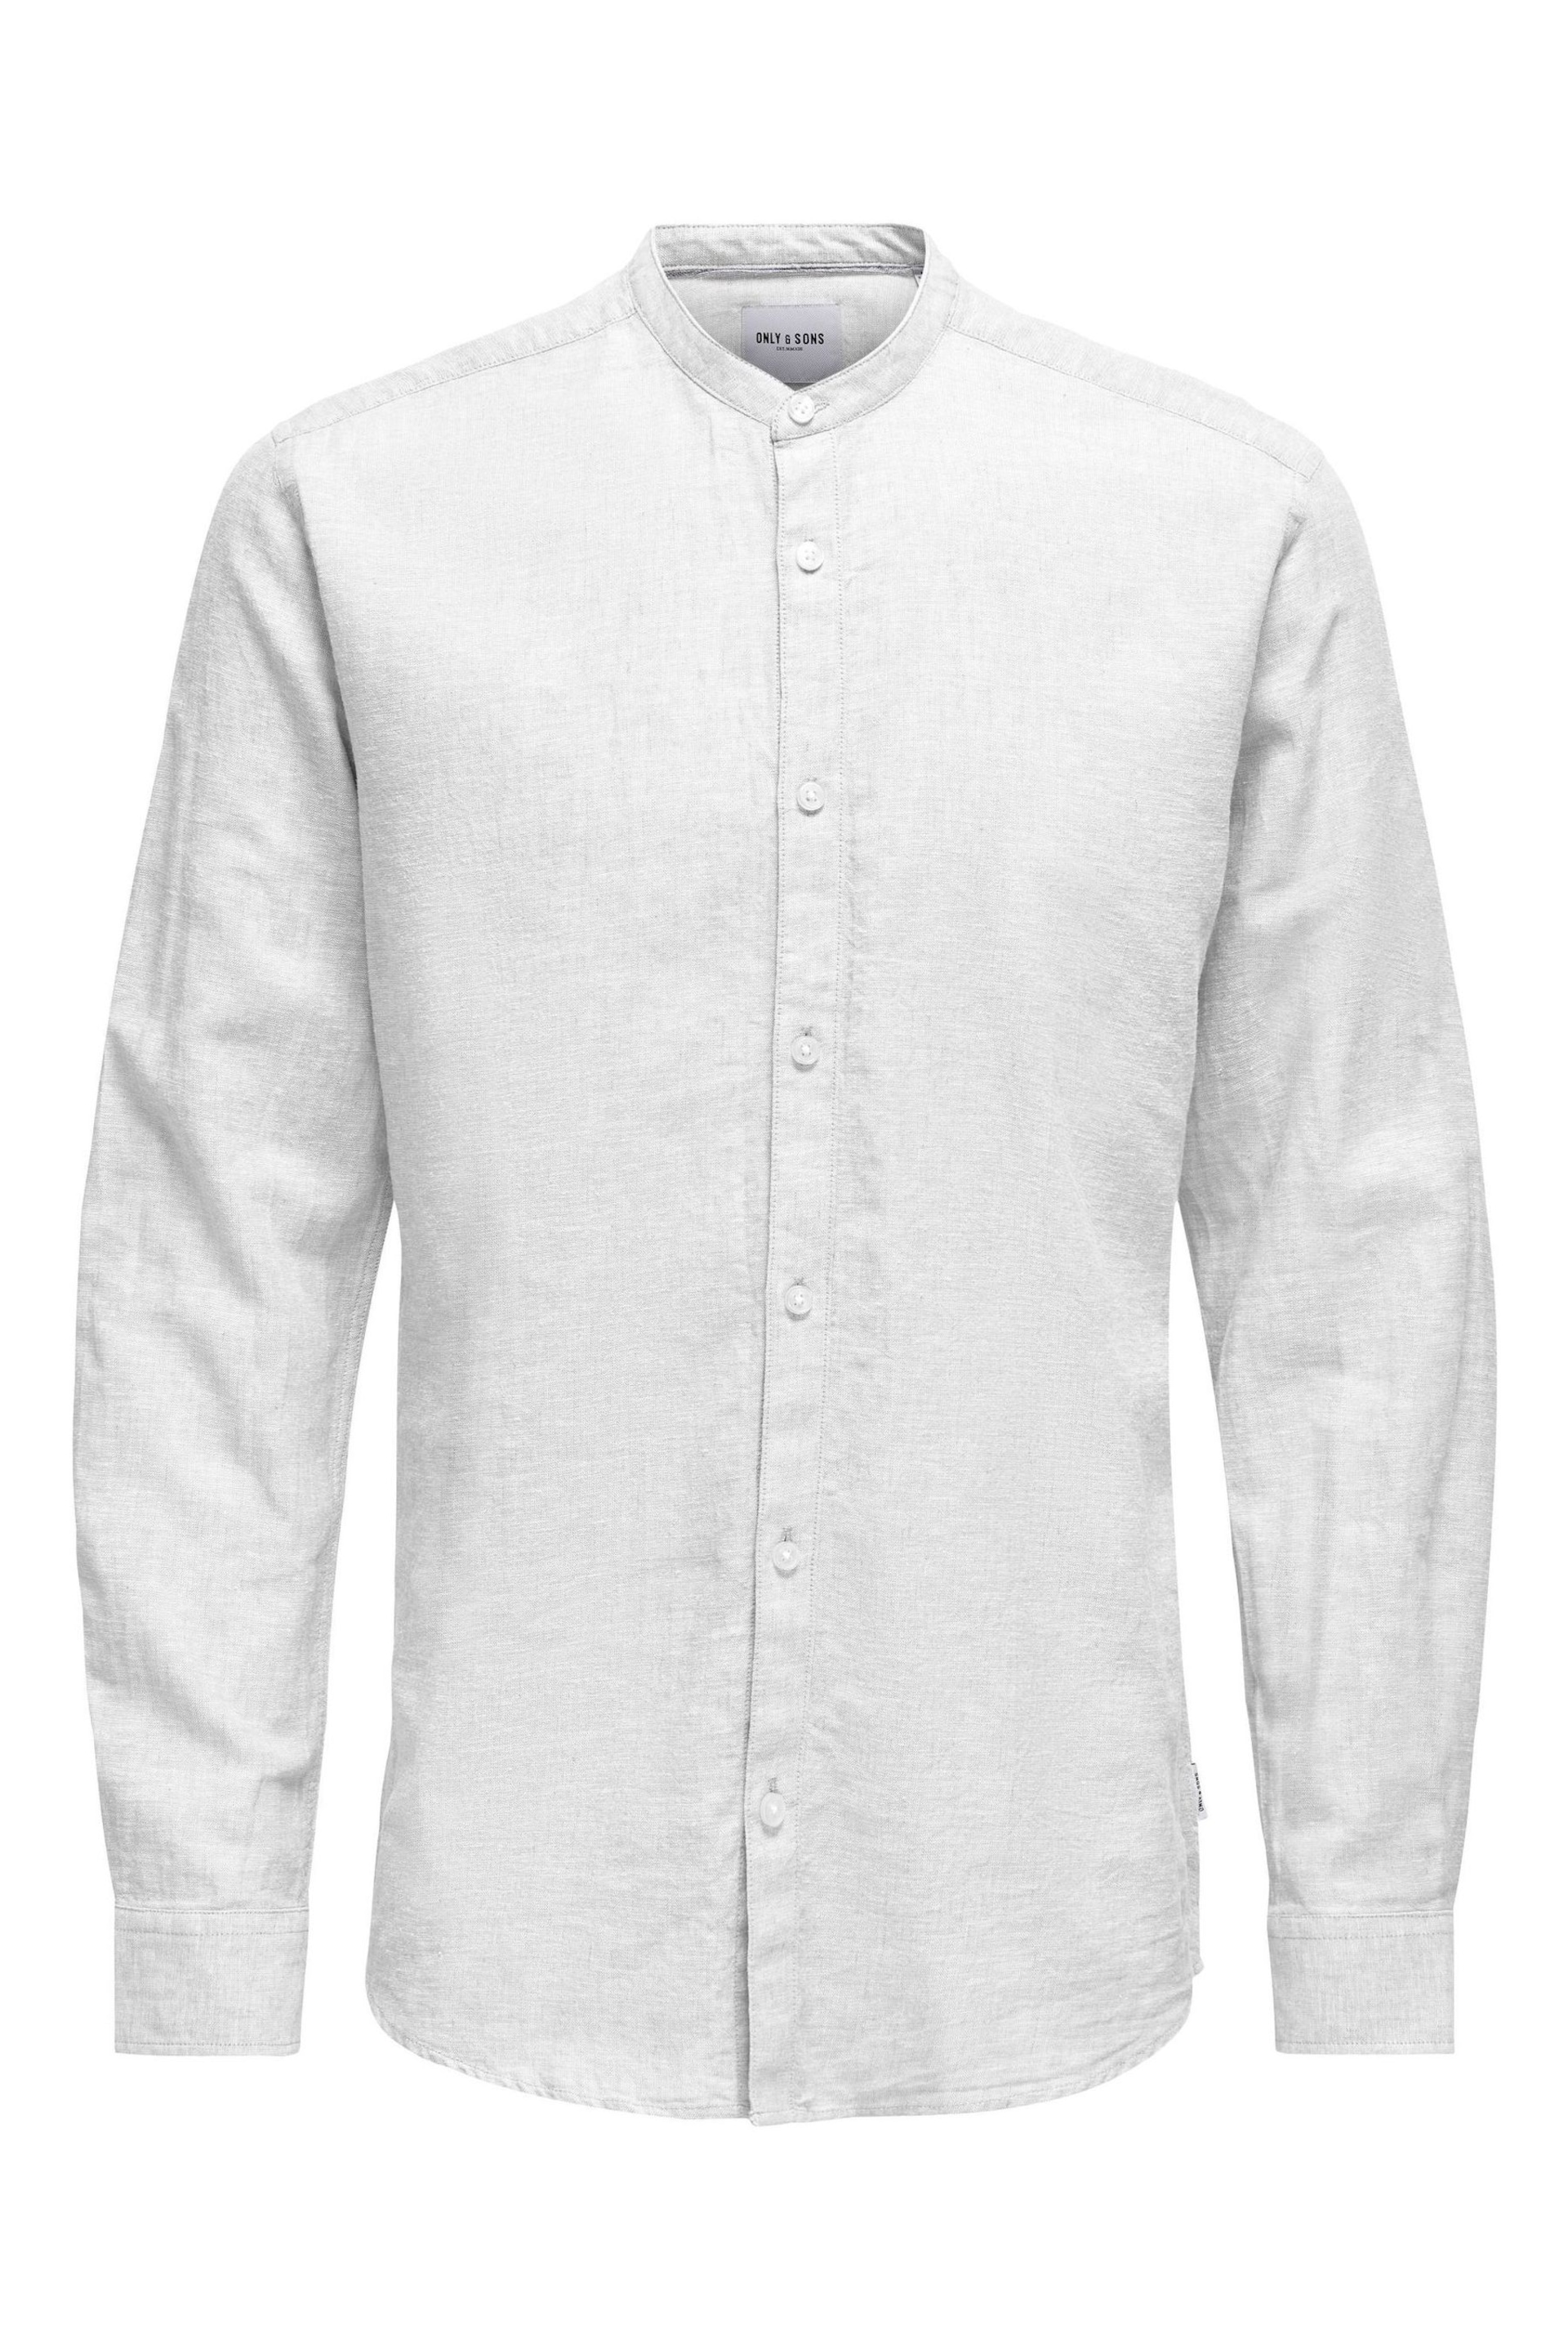 Only & Sons White Long Sleeve Button Up Shirt Contains Linen - Image 7 of 8